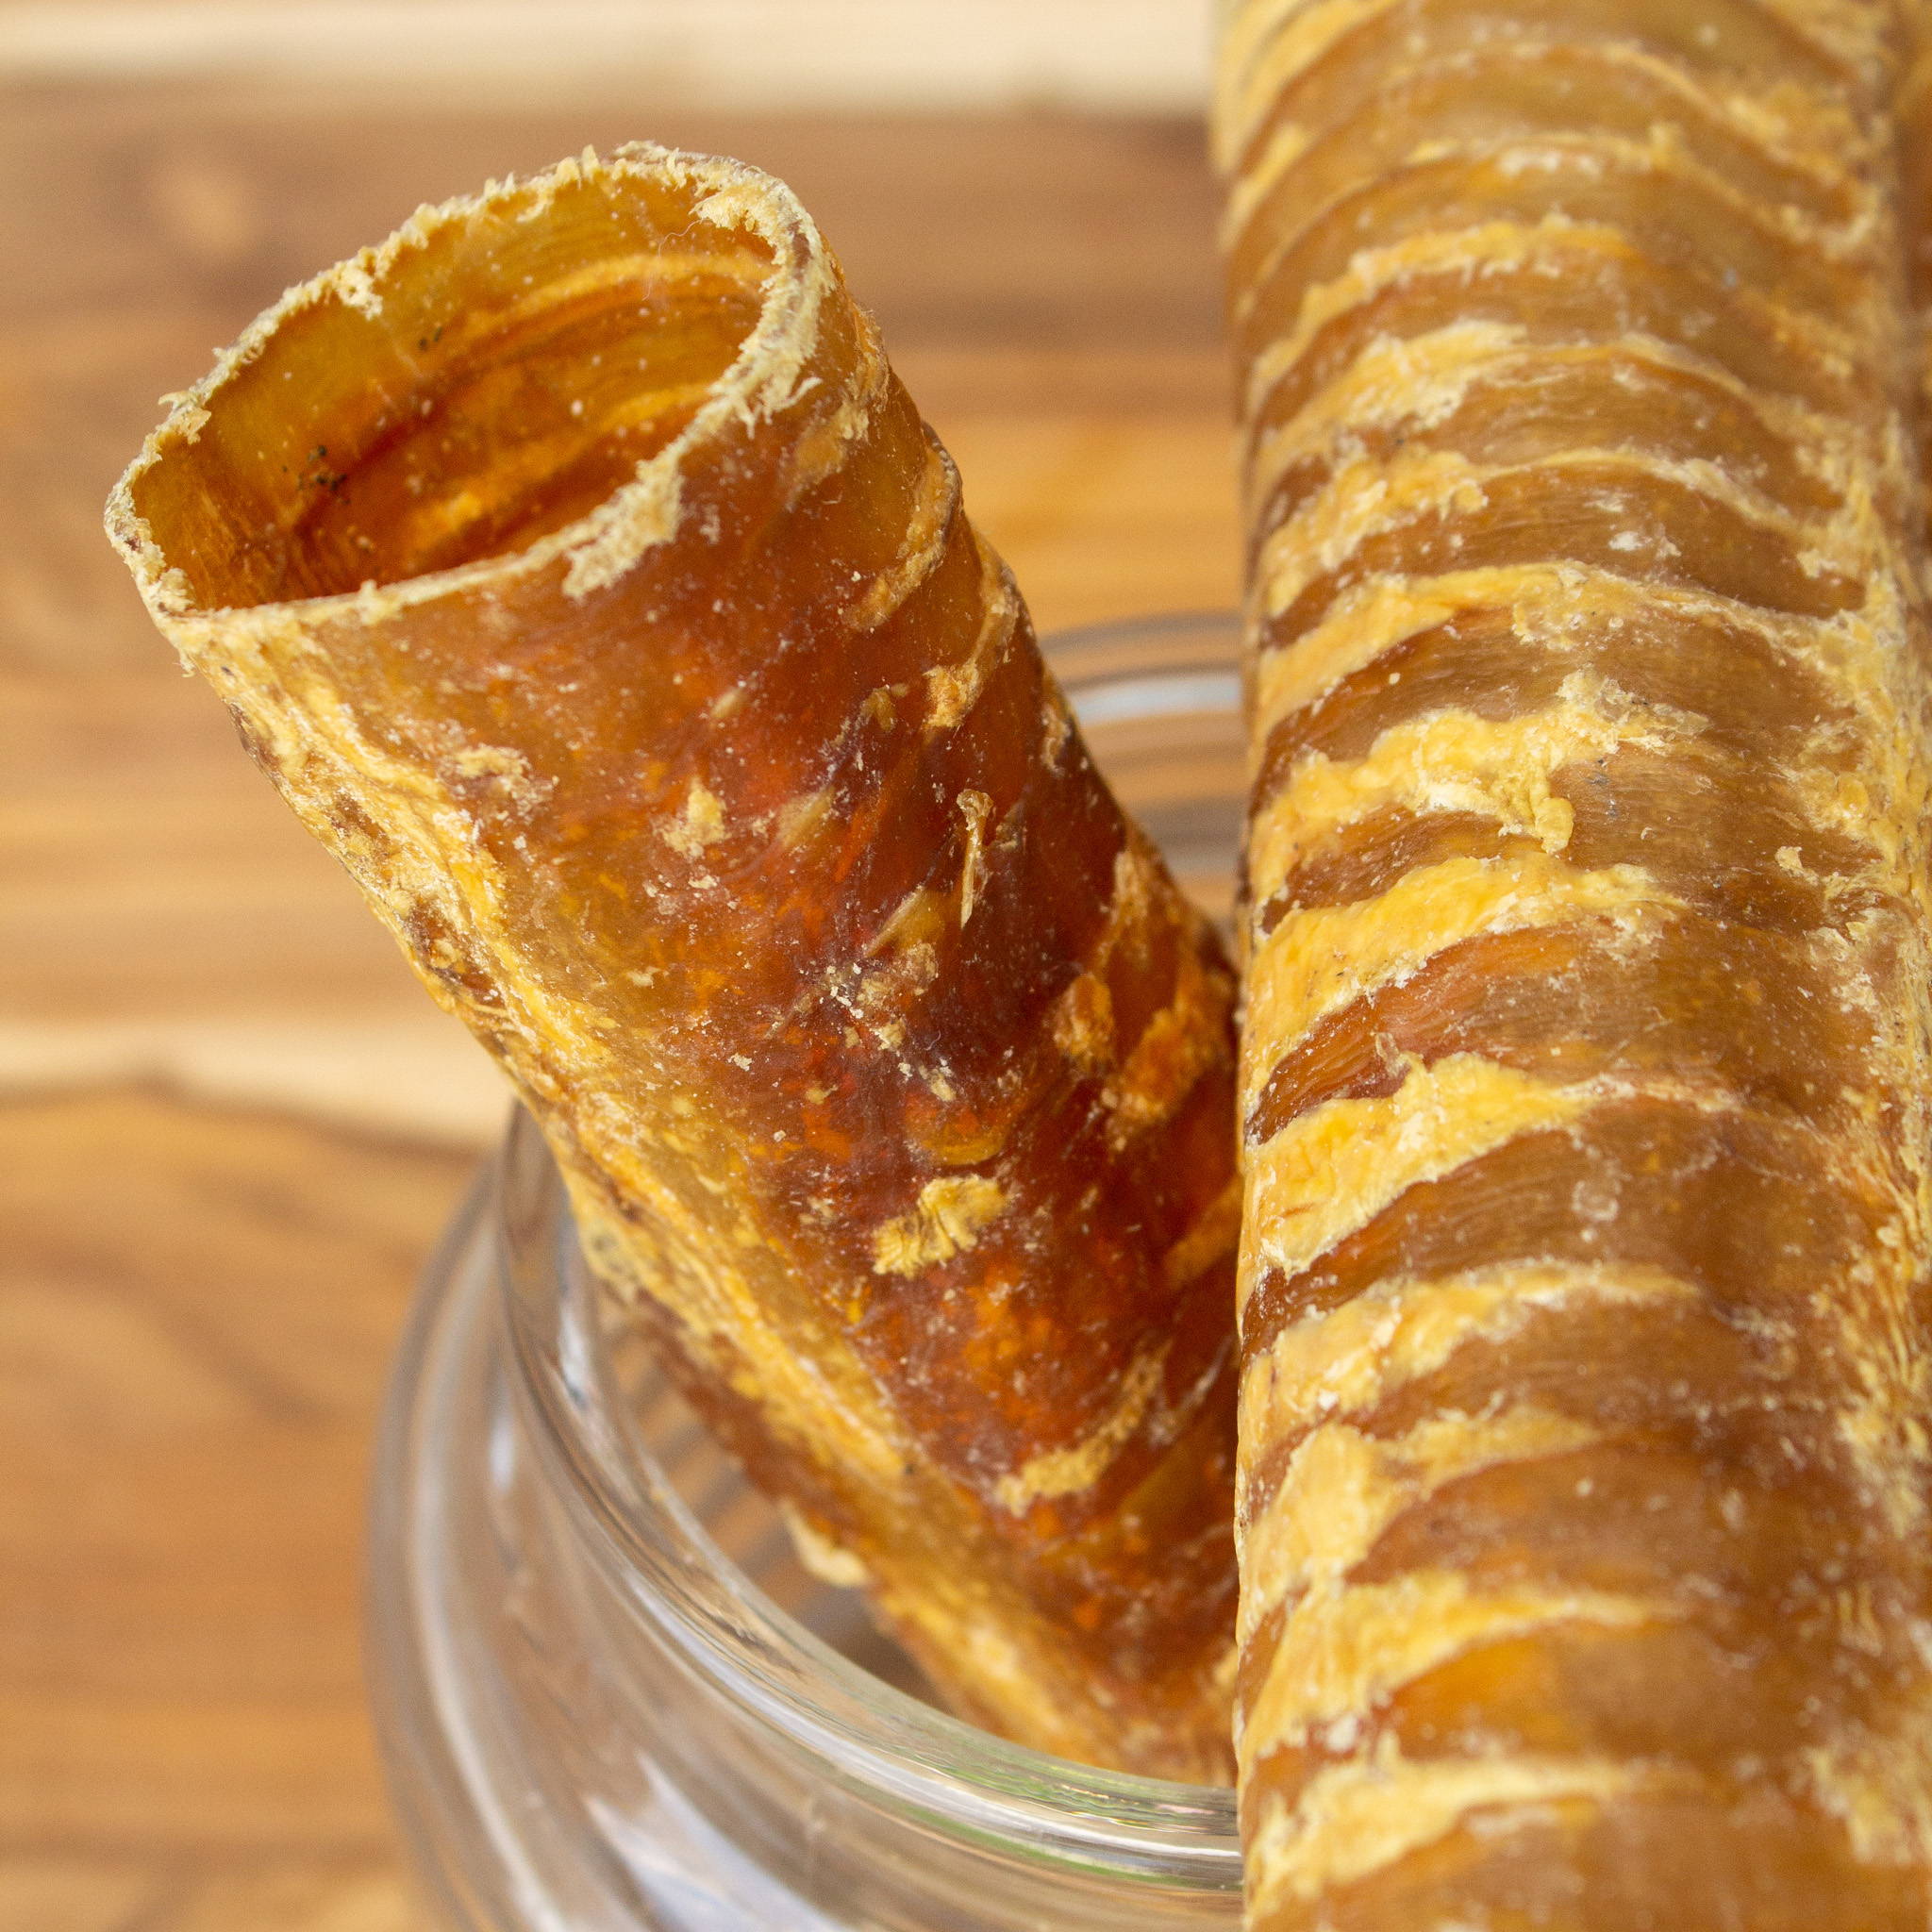 Close-up of two beef trachea chews in a glass jar on wooden surface.